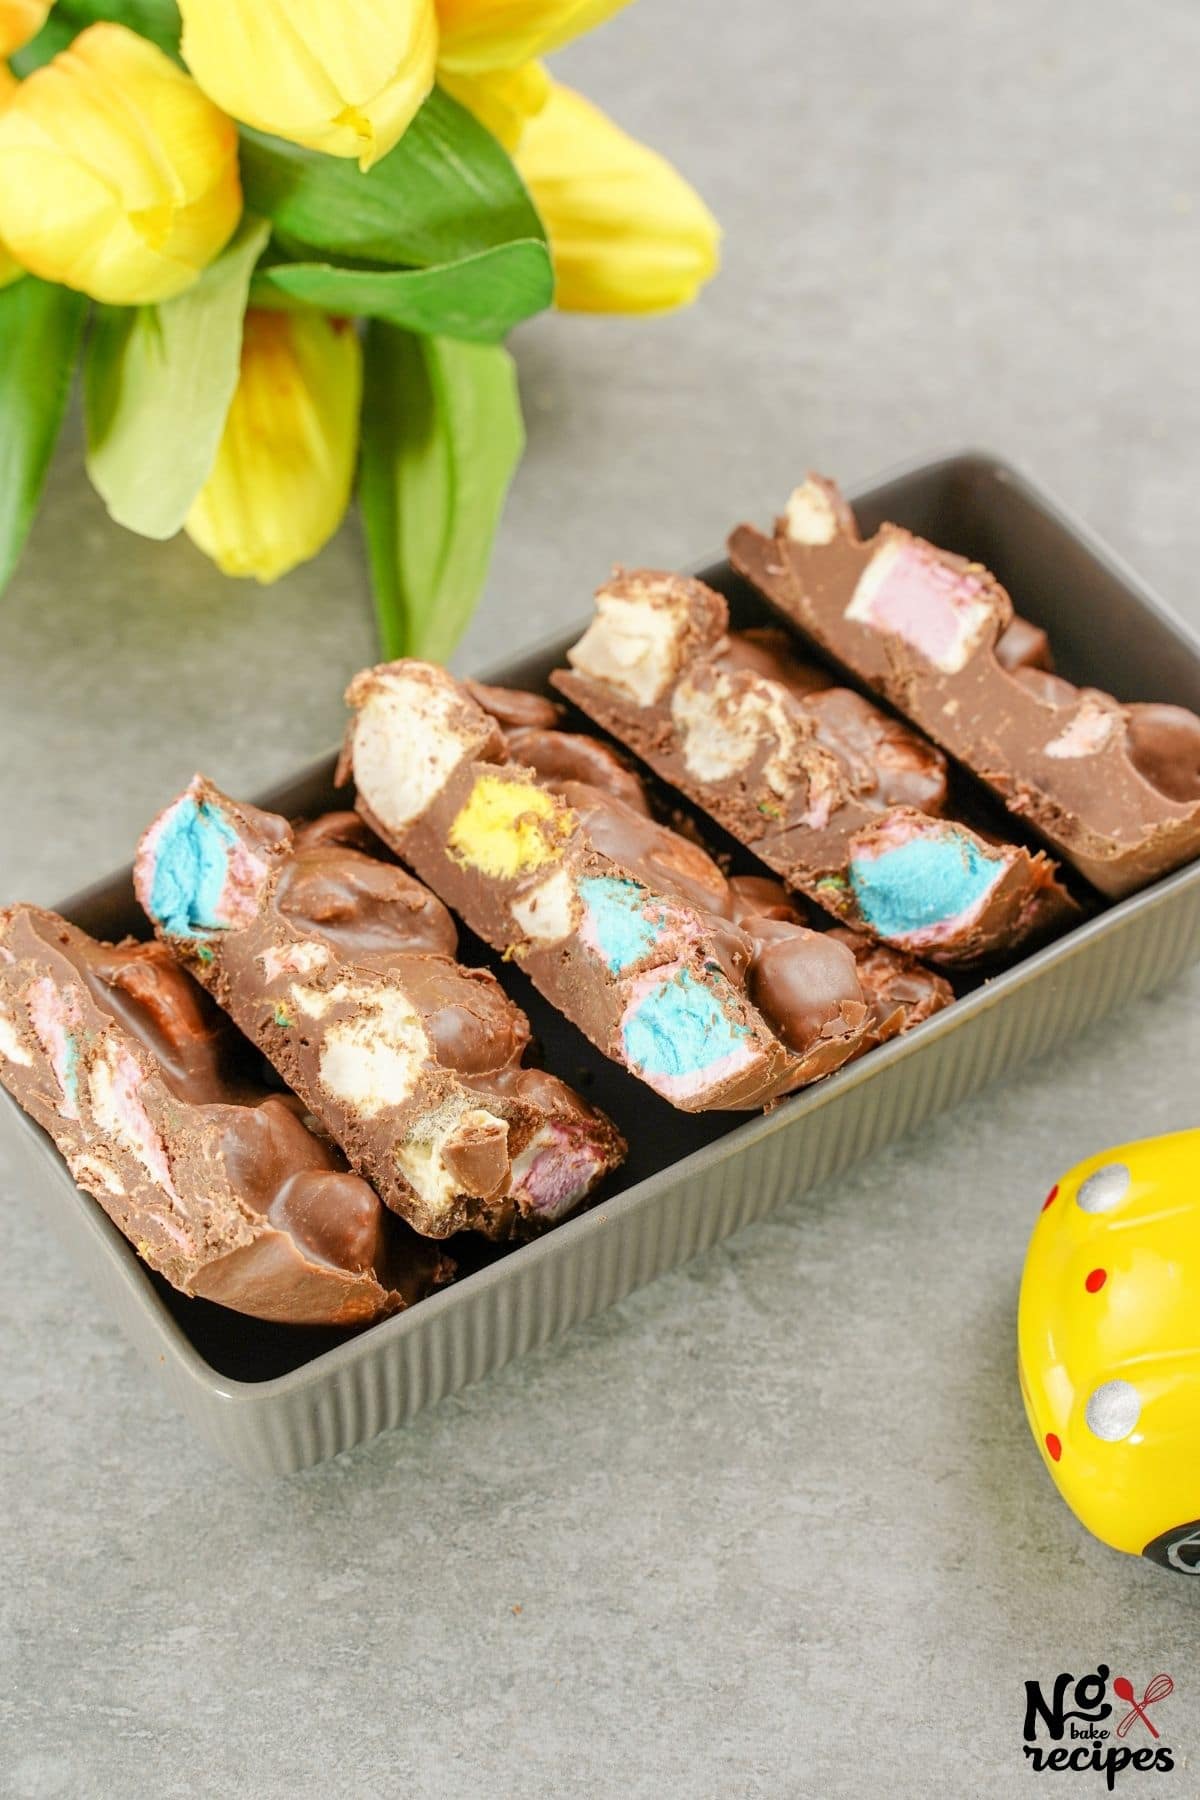 sliced rocky road bars in brown tray on gray table